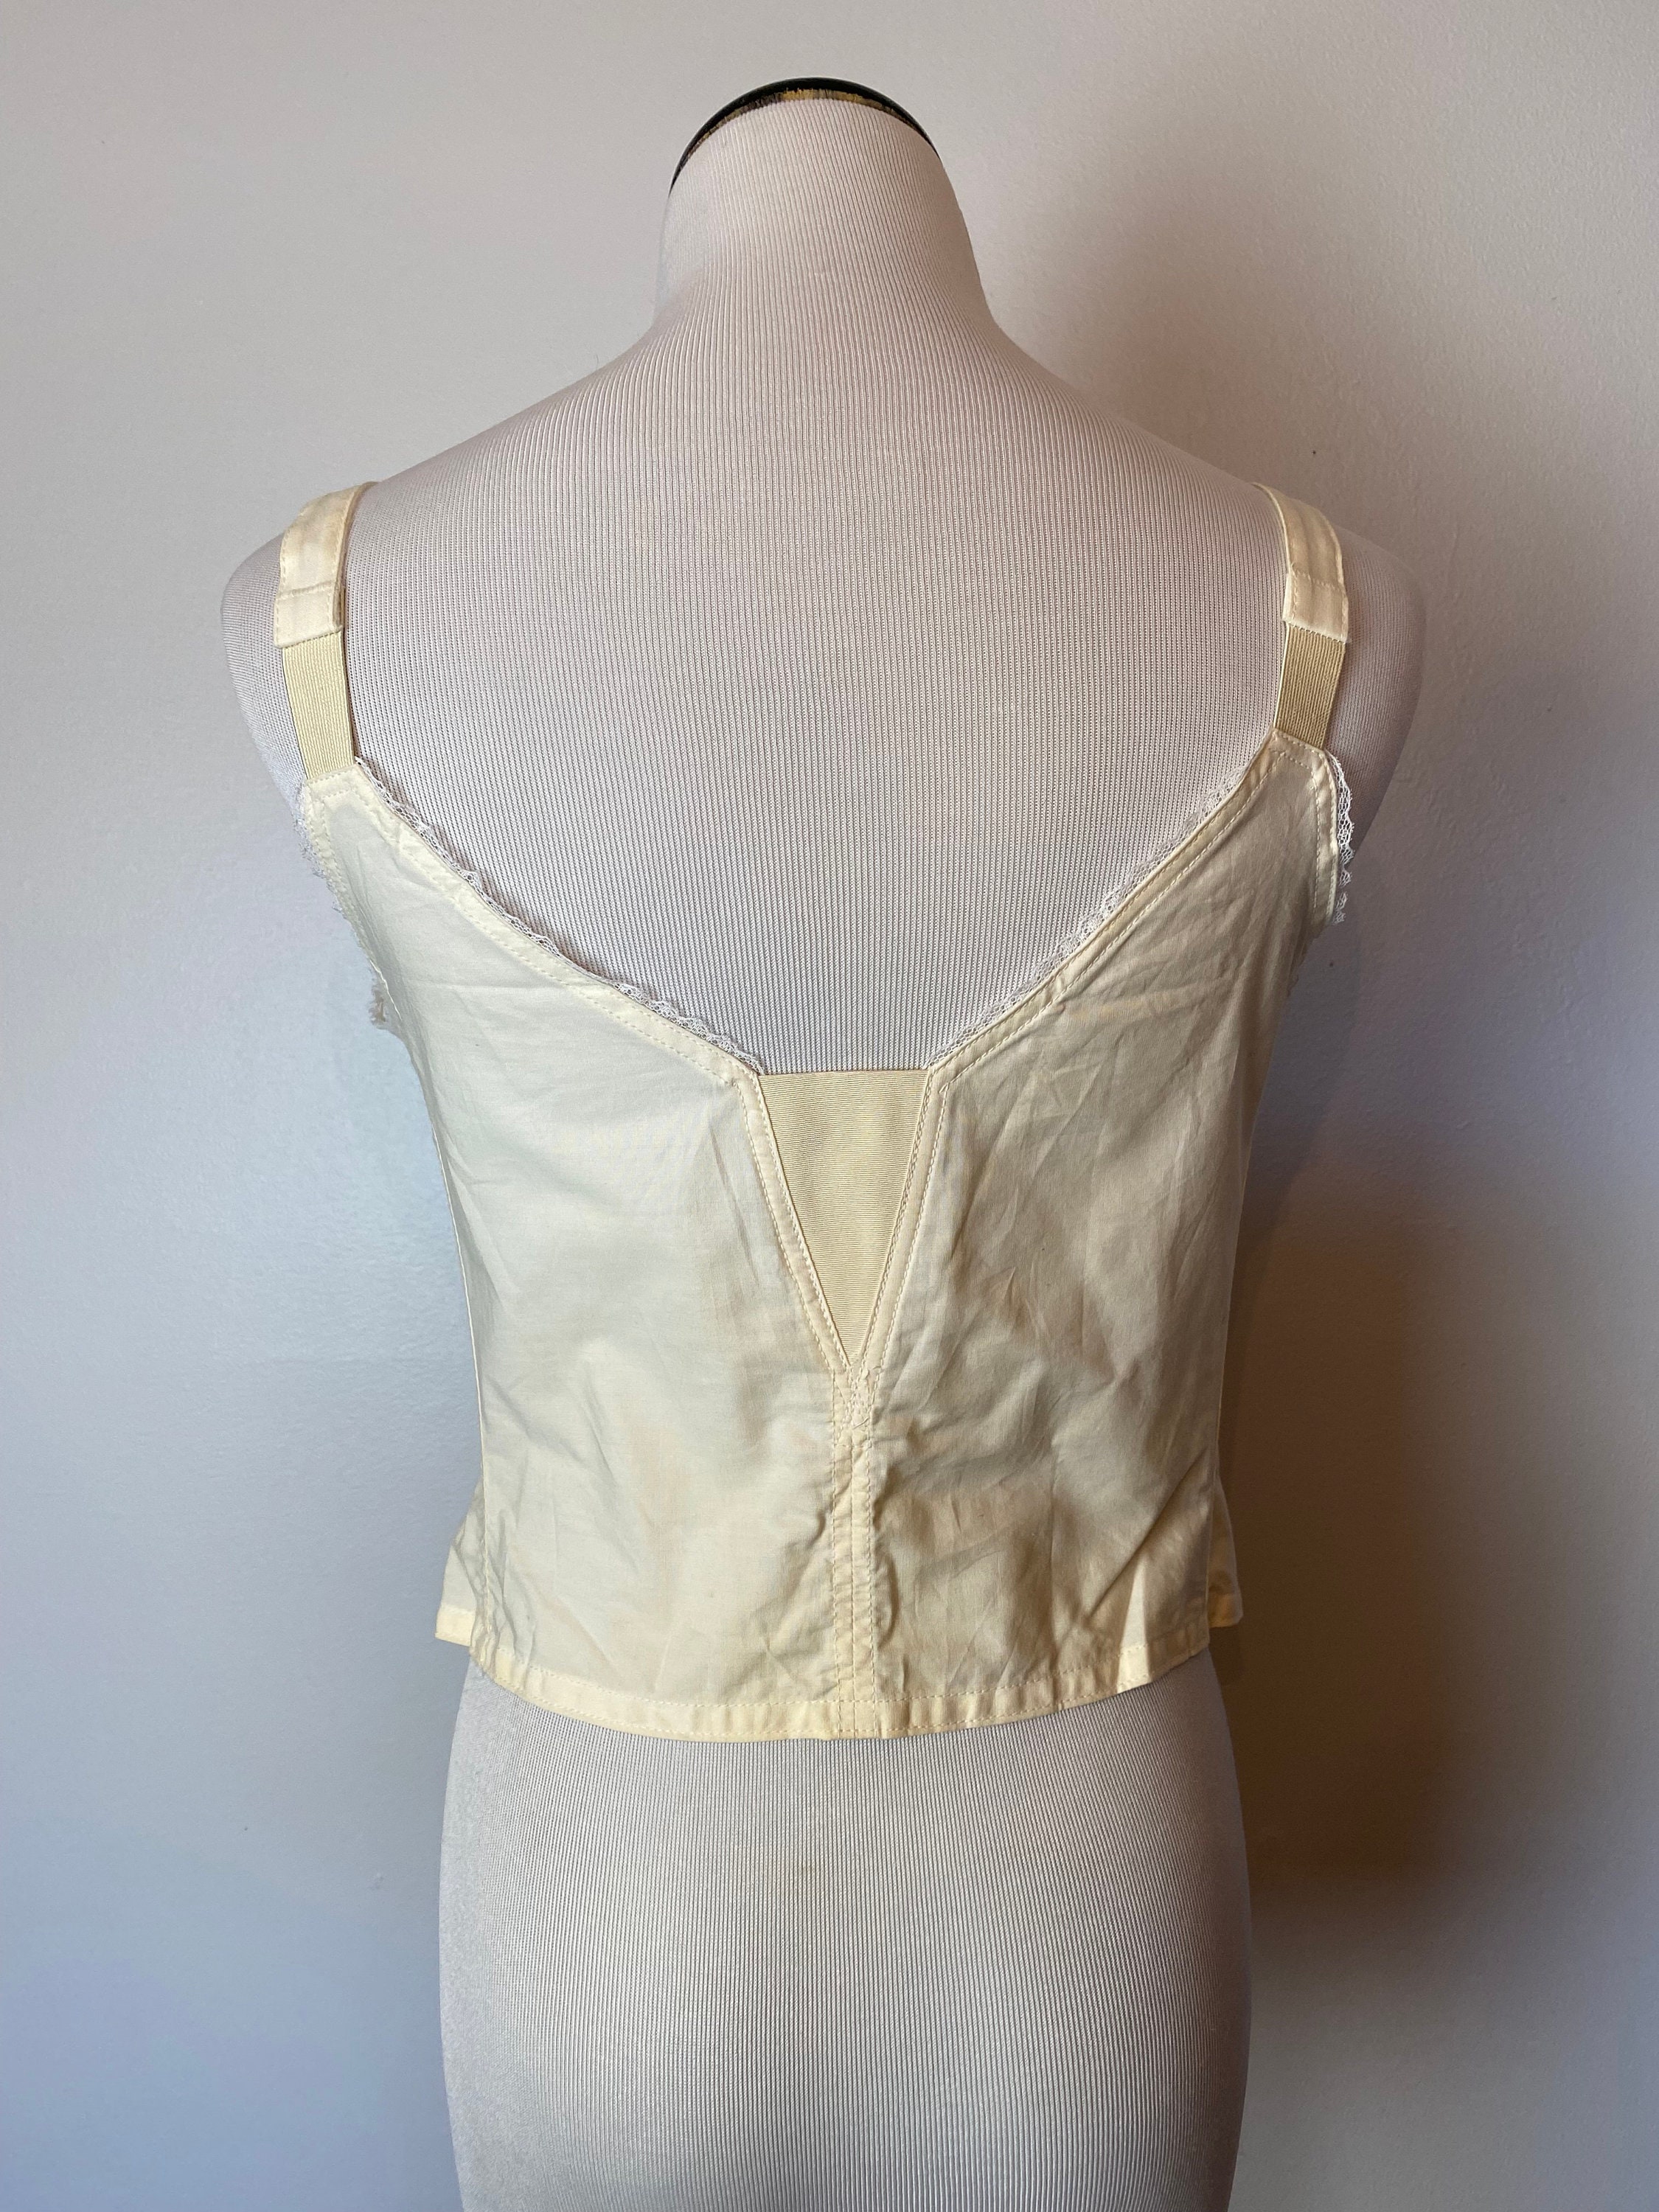 Vintage 1950s Bullet Bra 40 C Cotton Deadstock With Tags 50s Pinup